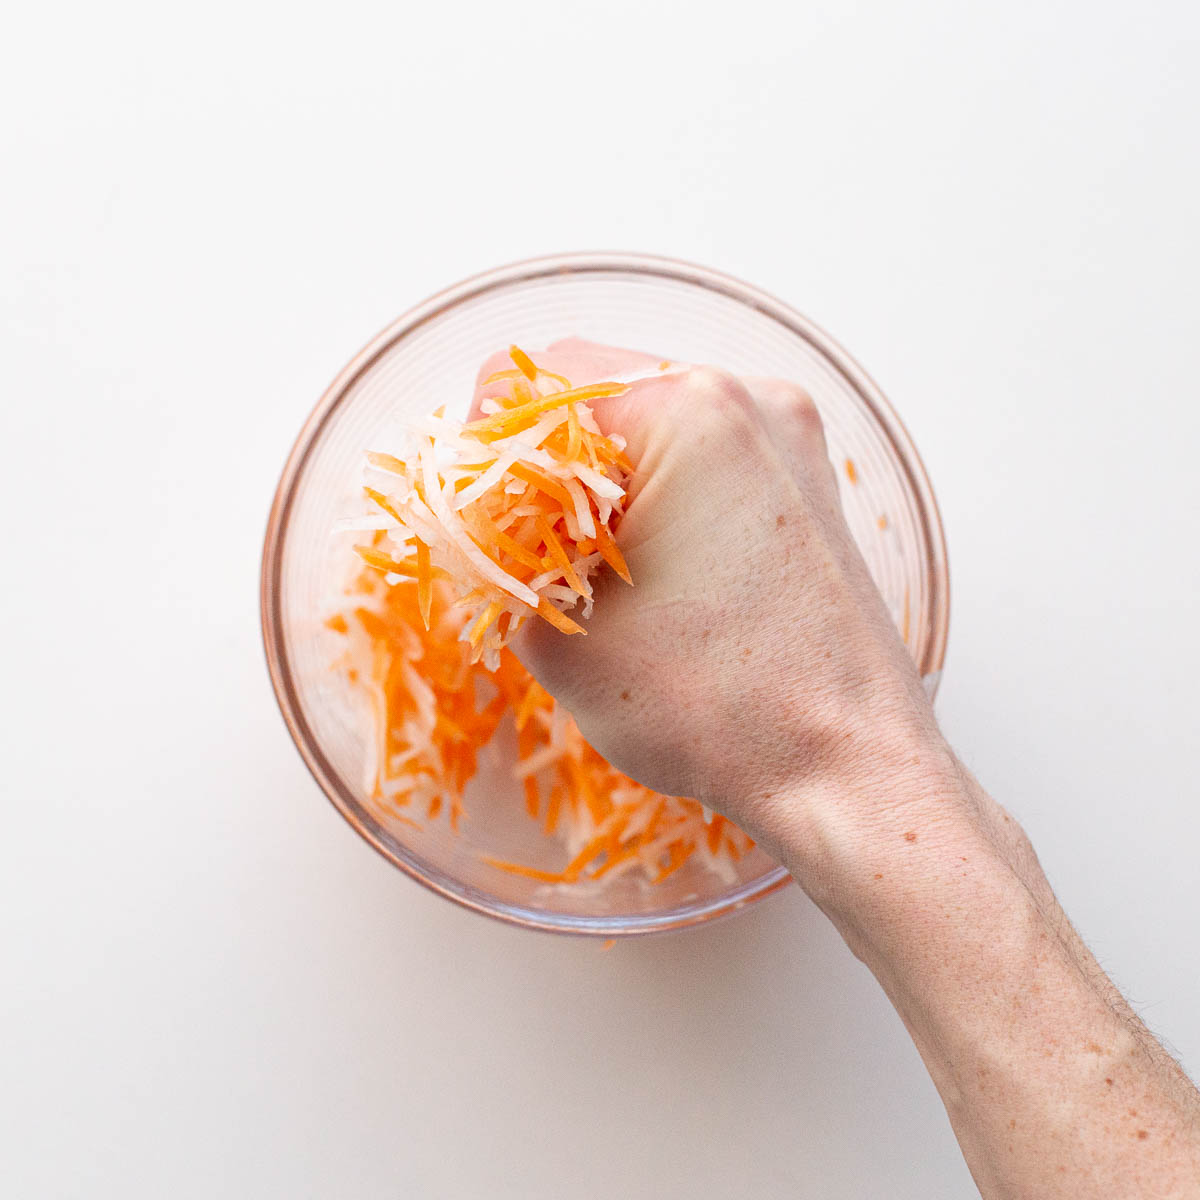 A hand squeezing out excess water from the carrot and daikon.